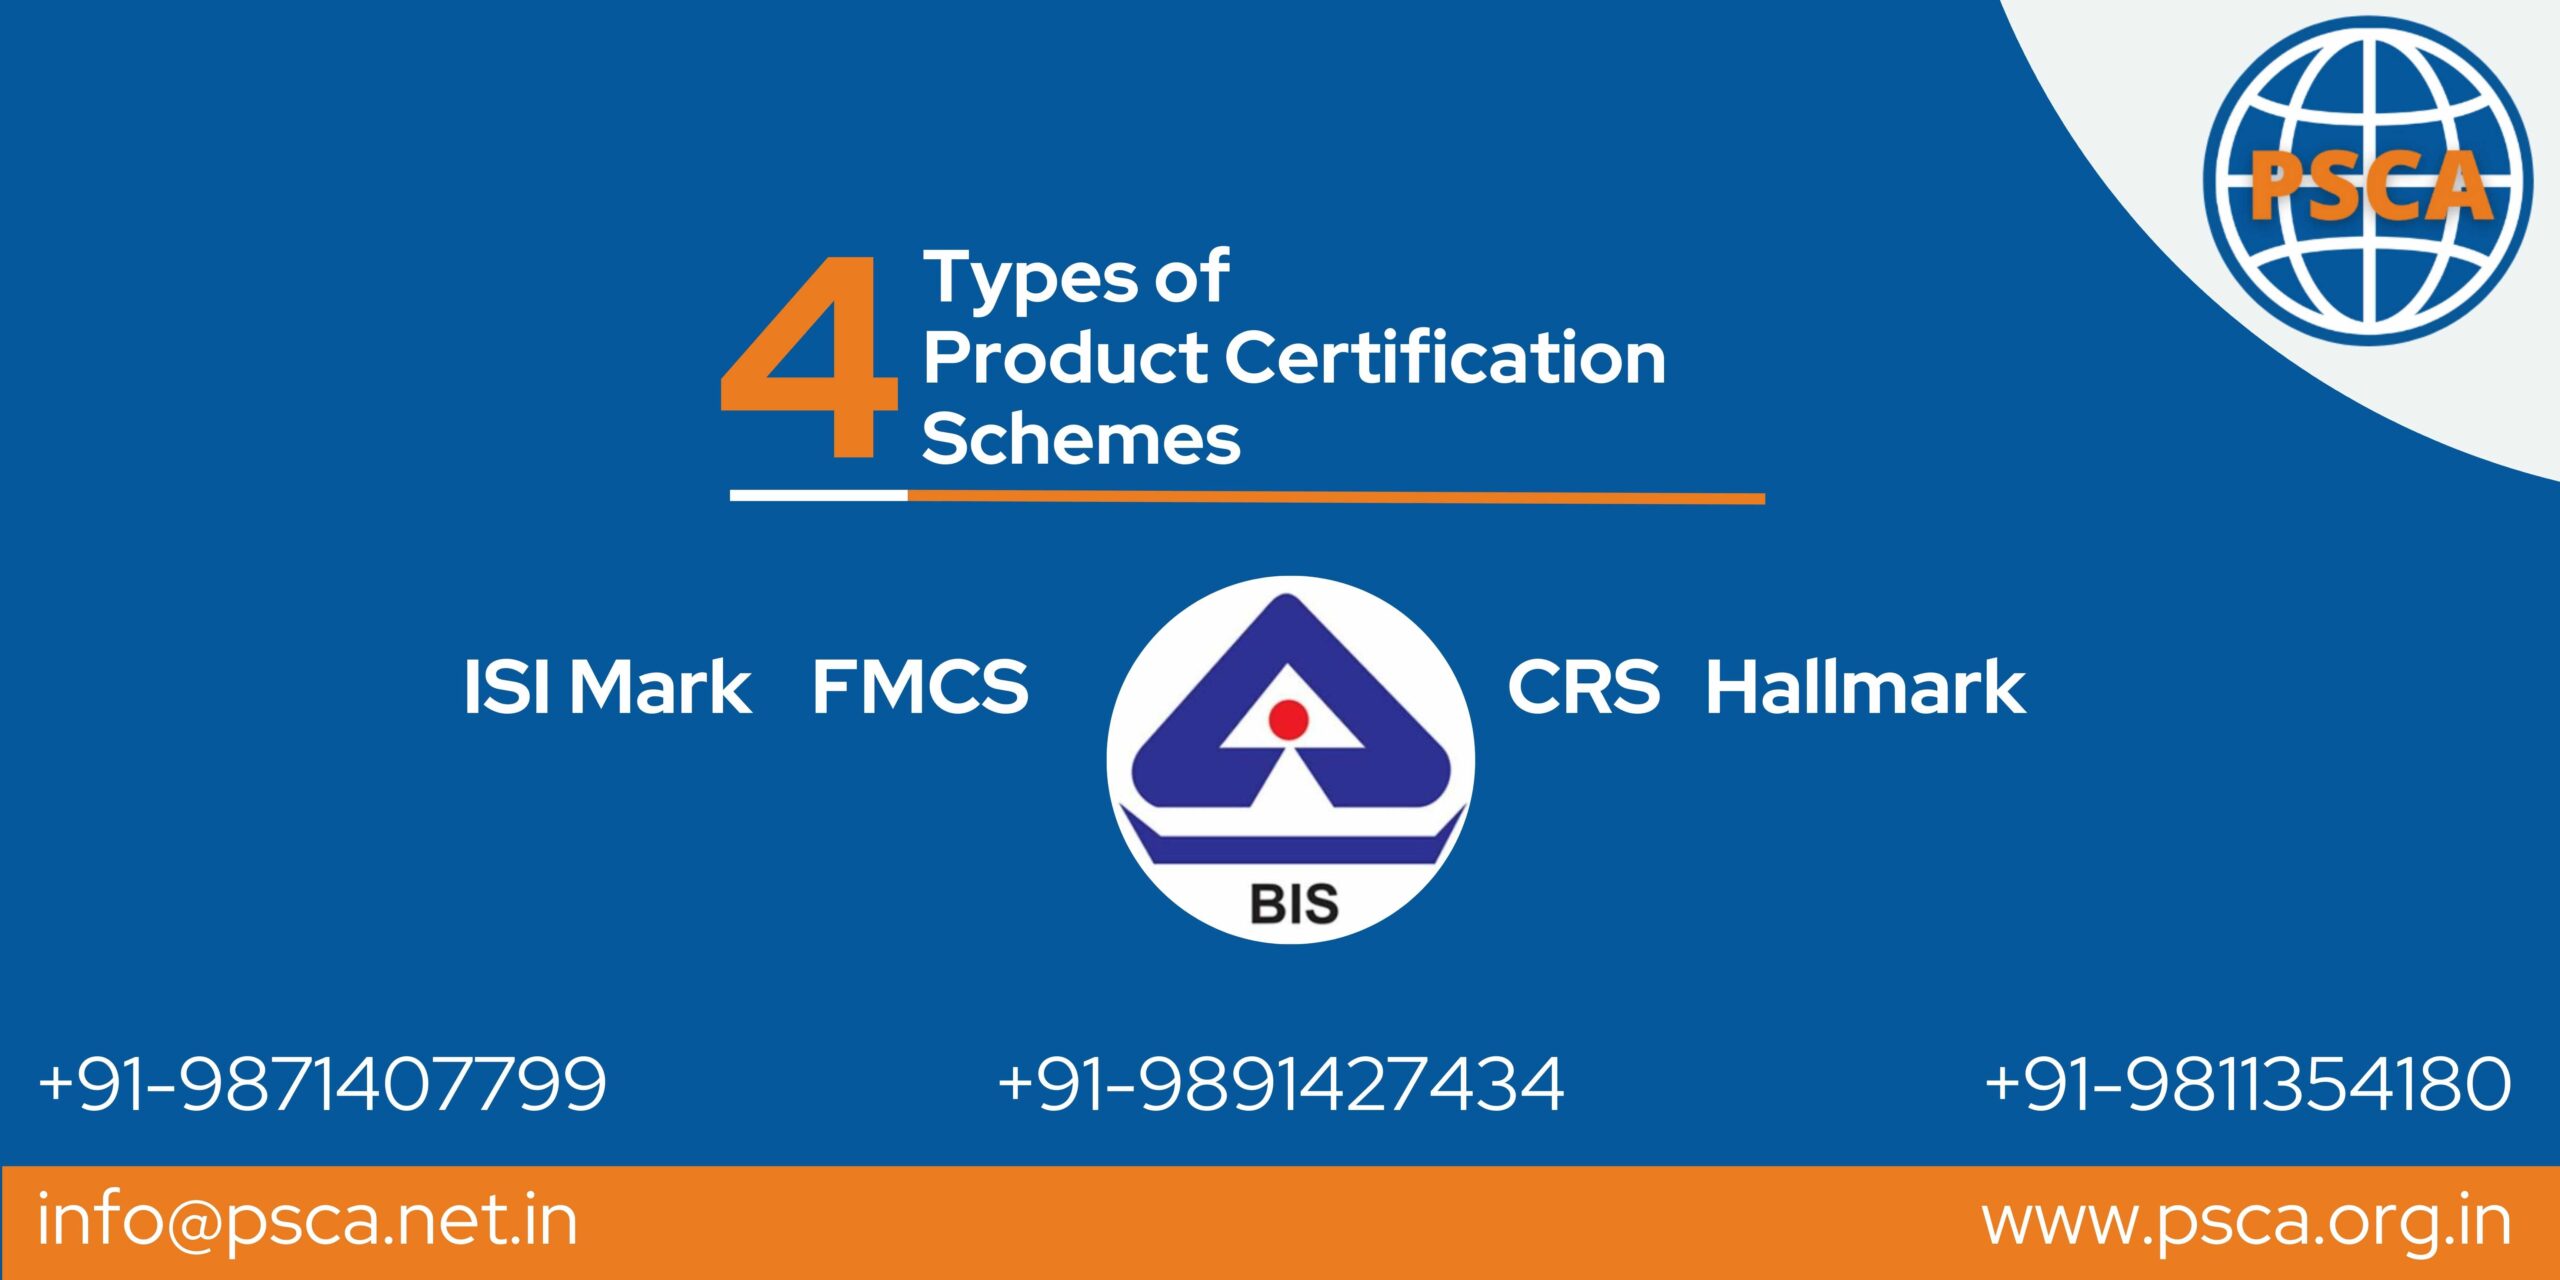 The 4 Types of Product Certifications – ISI Mark, CRS, FMCS and Hallmark